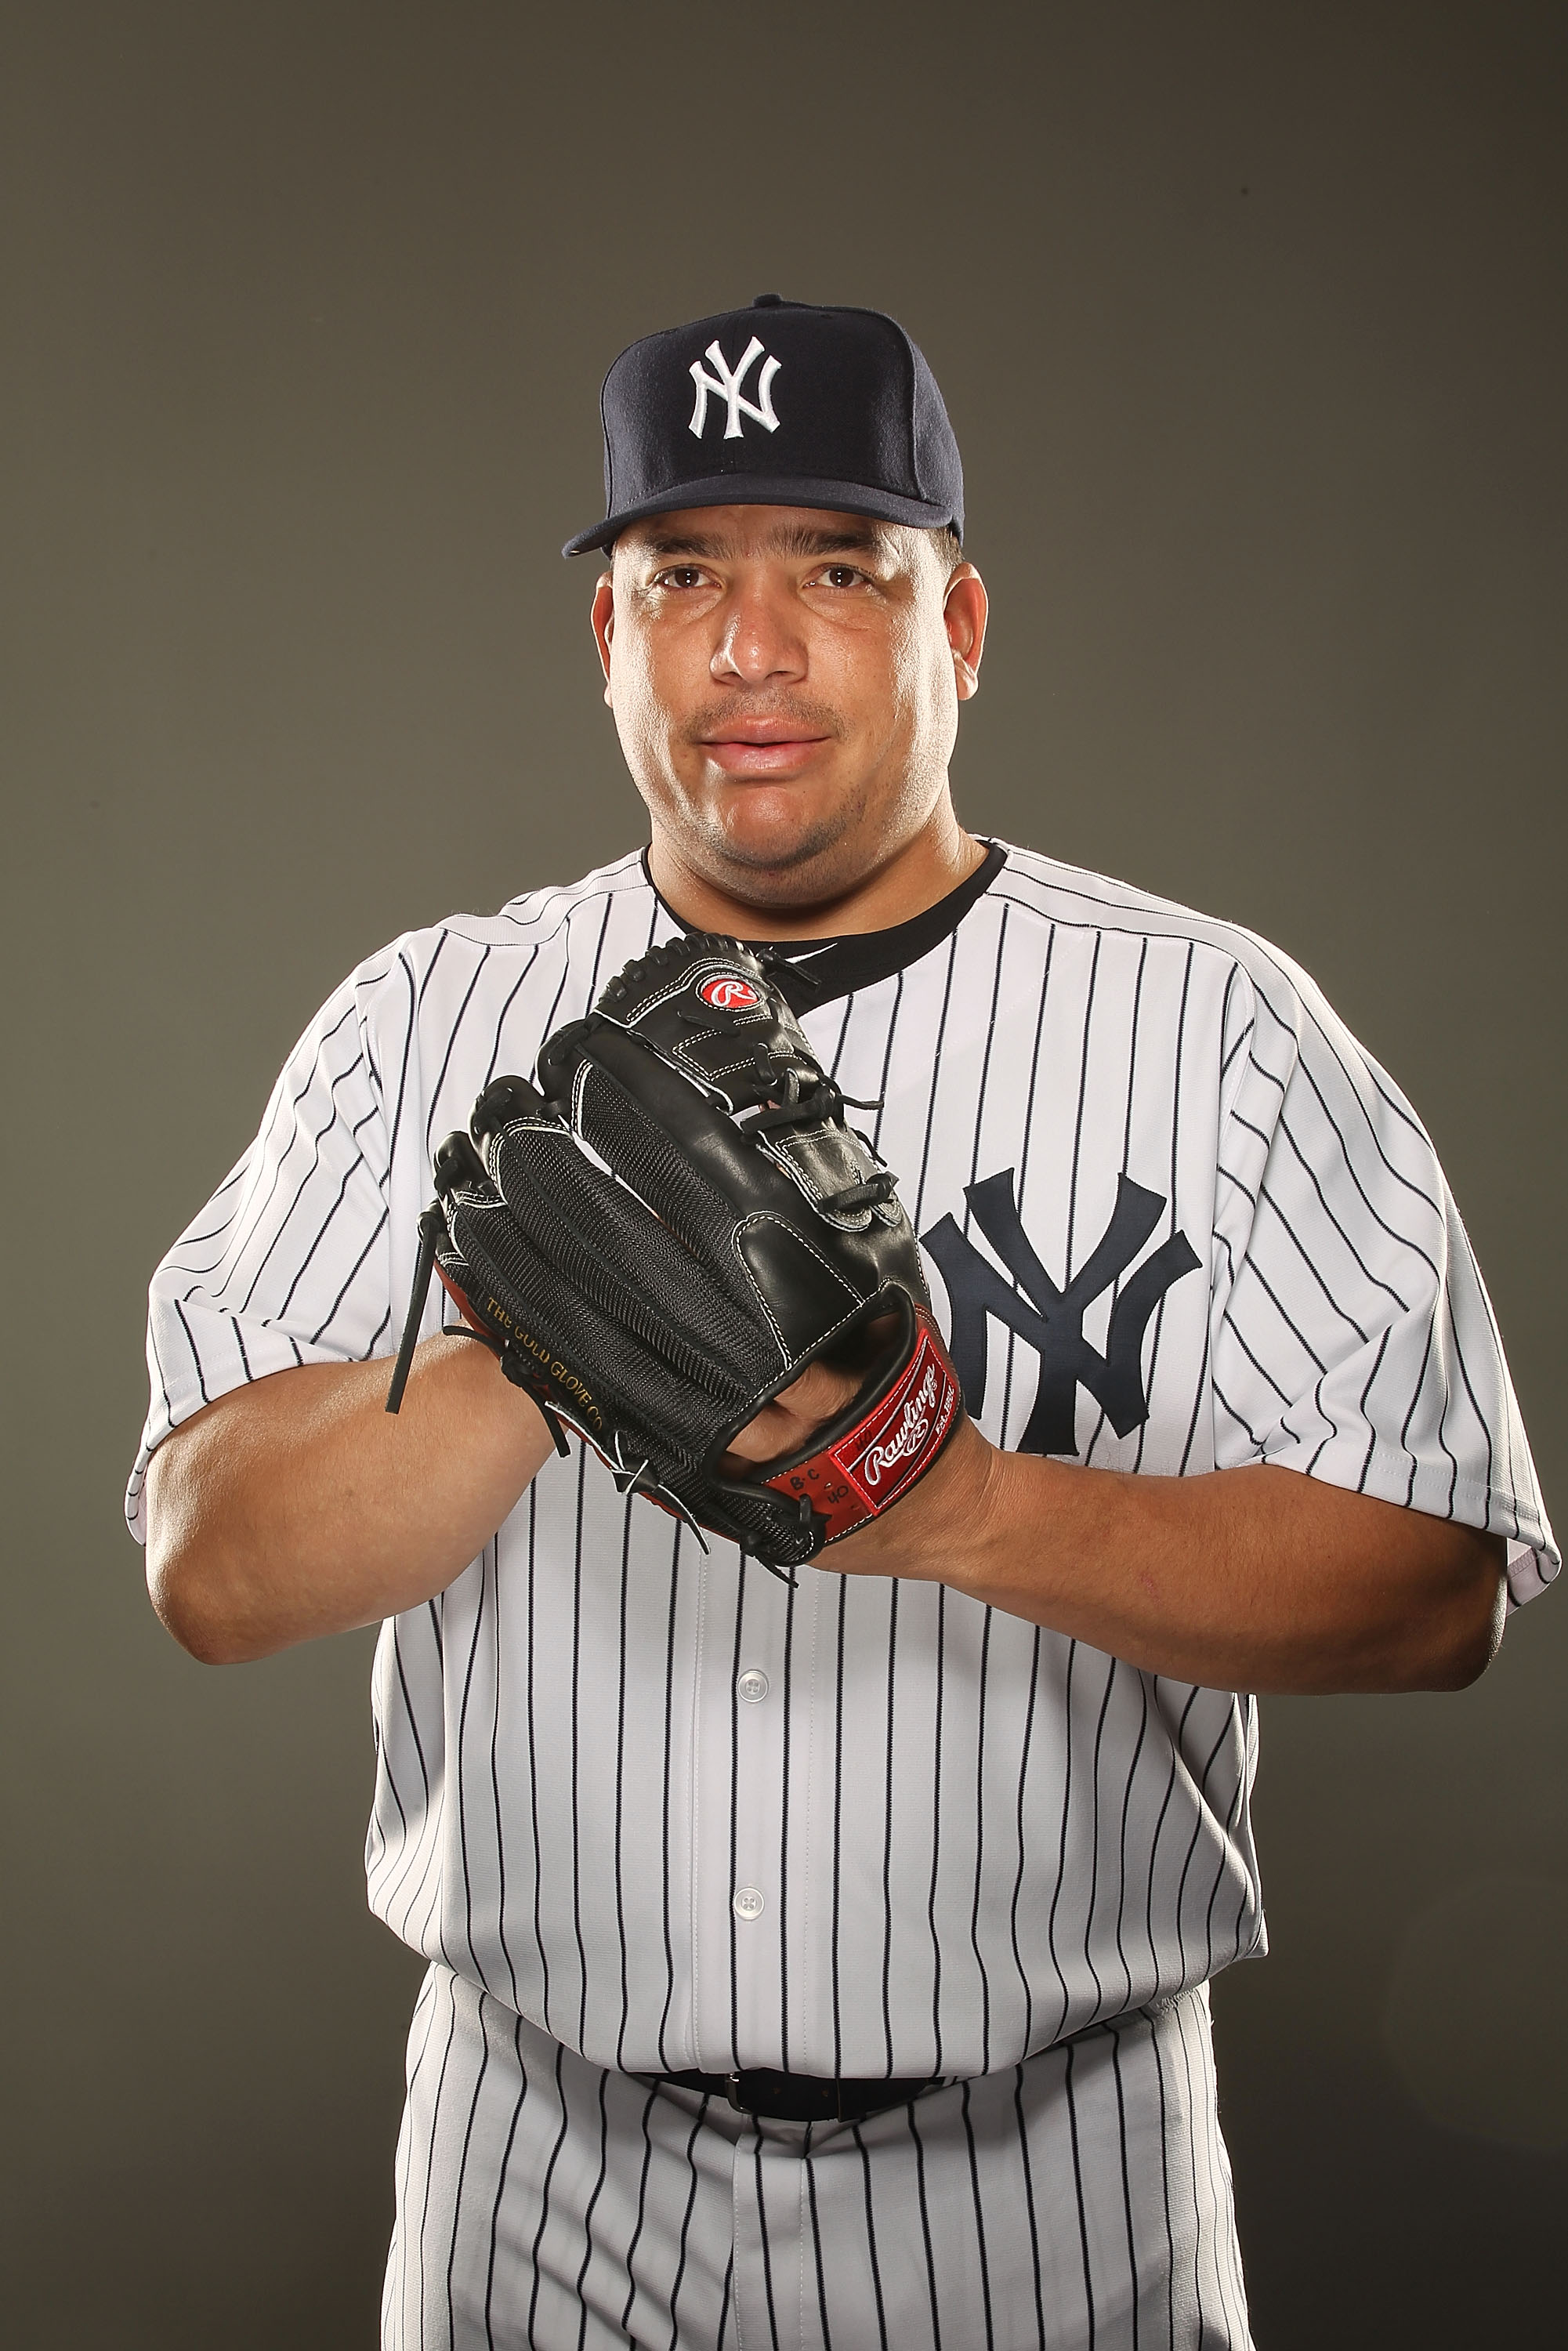 Bartolo Colon's influence is all over MLB, just ask the Yankees